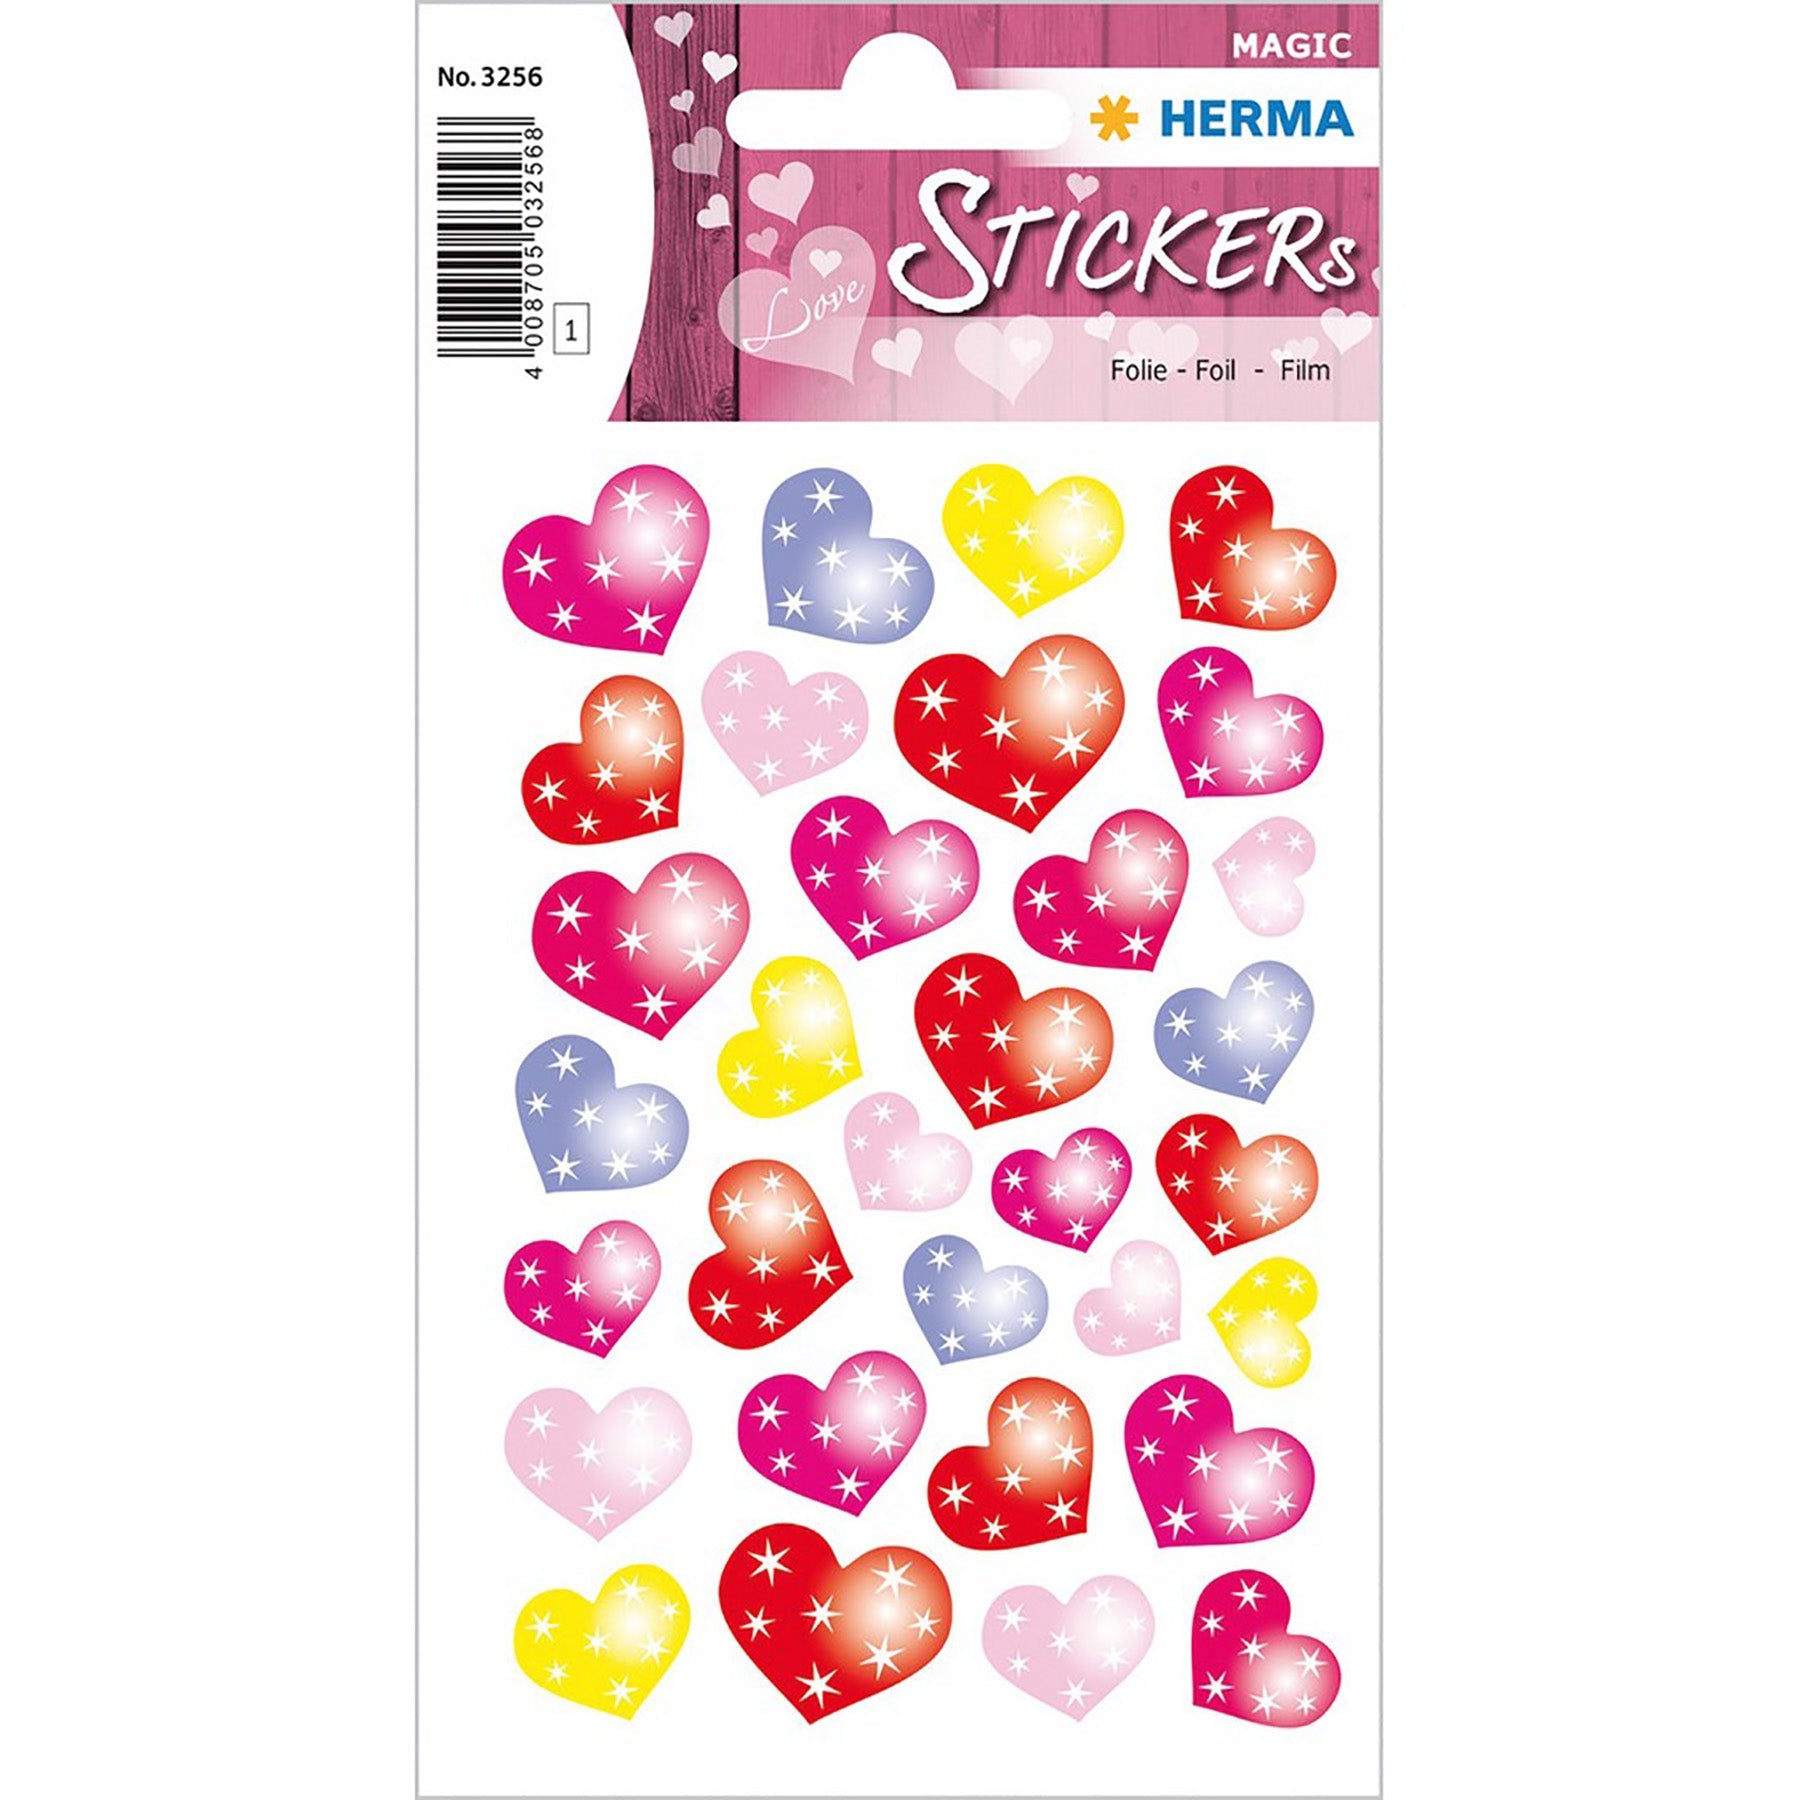 Herma Magic Stickers Starry Hearts Foil 4.75x3.1in Sheet